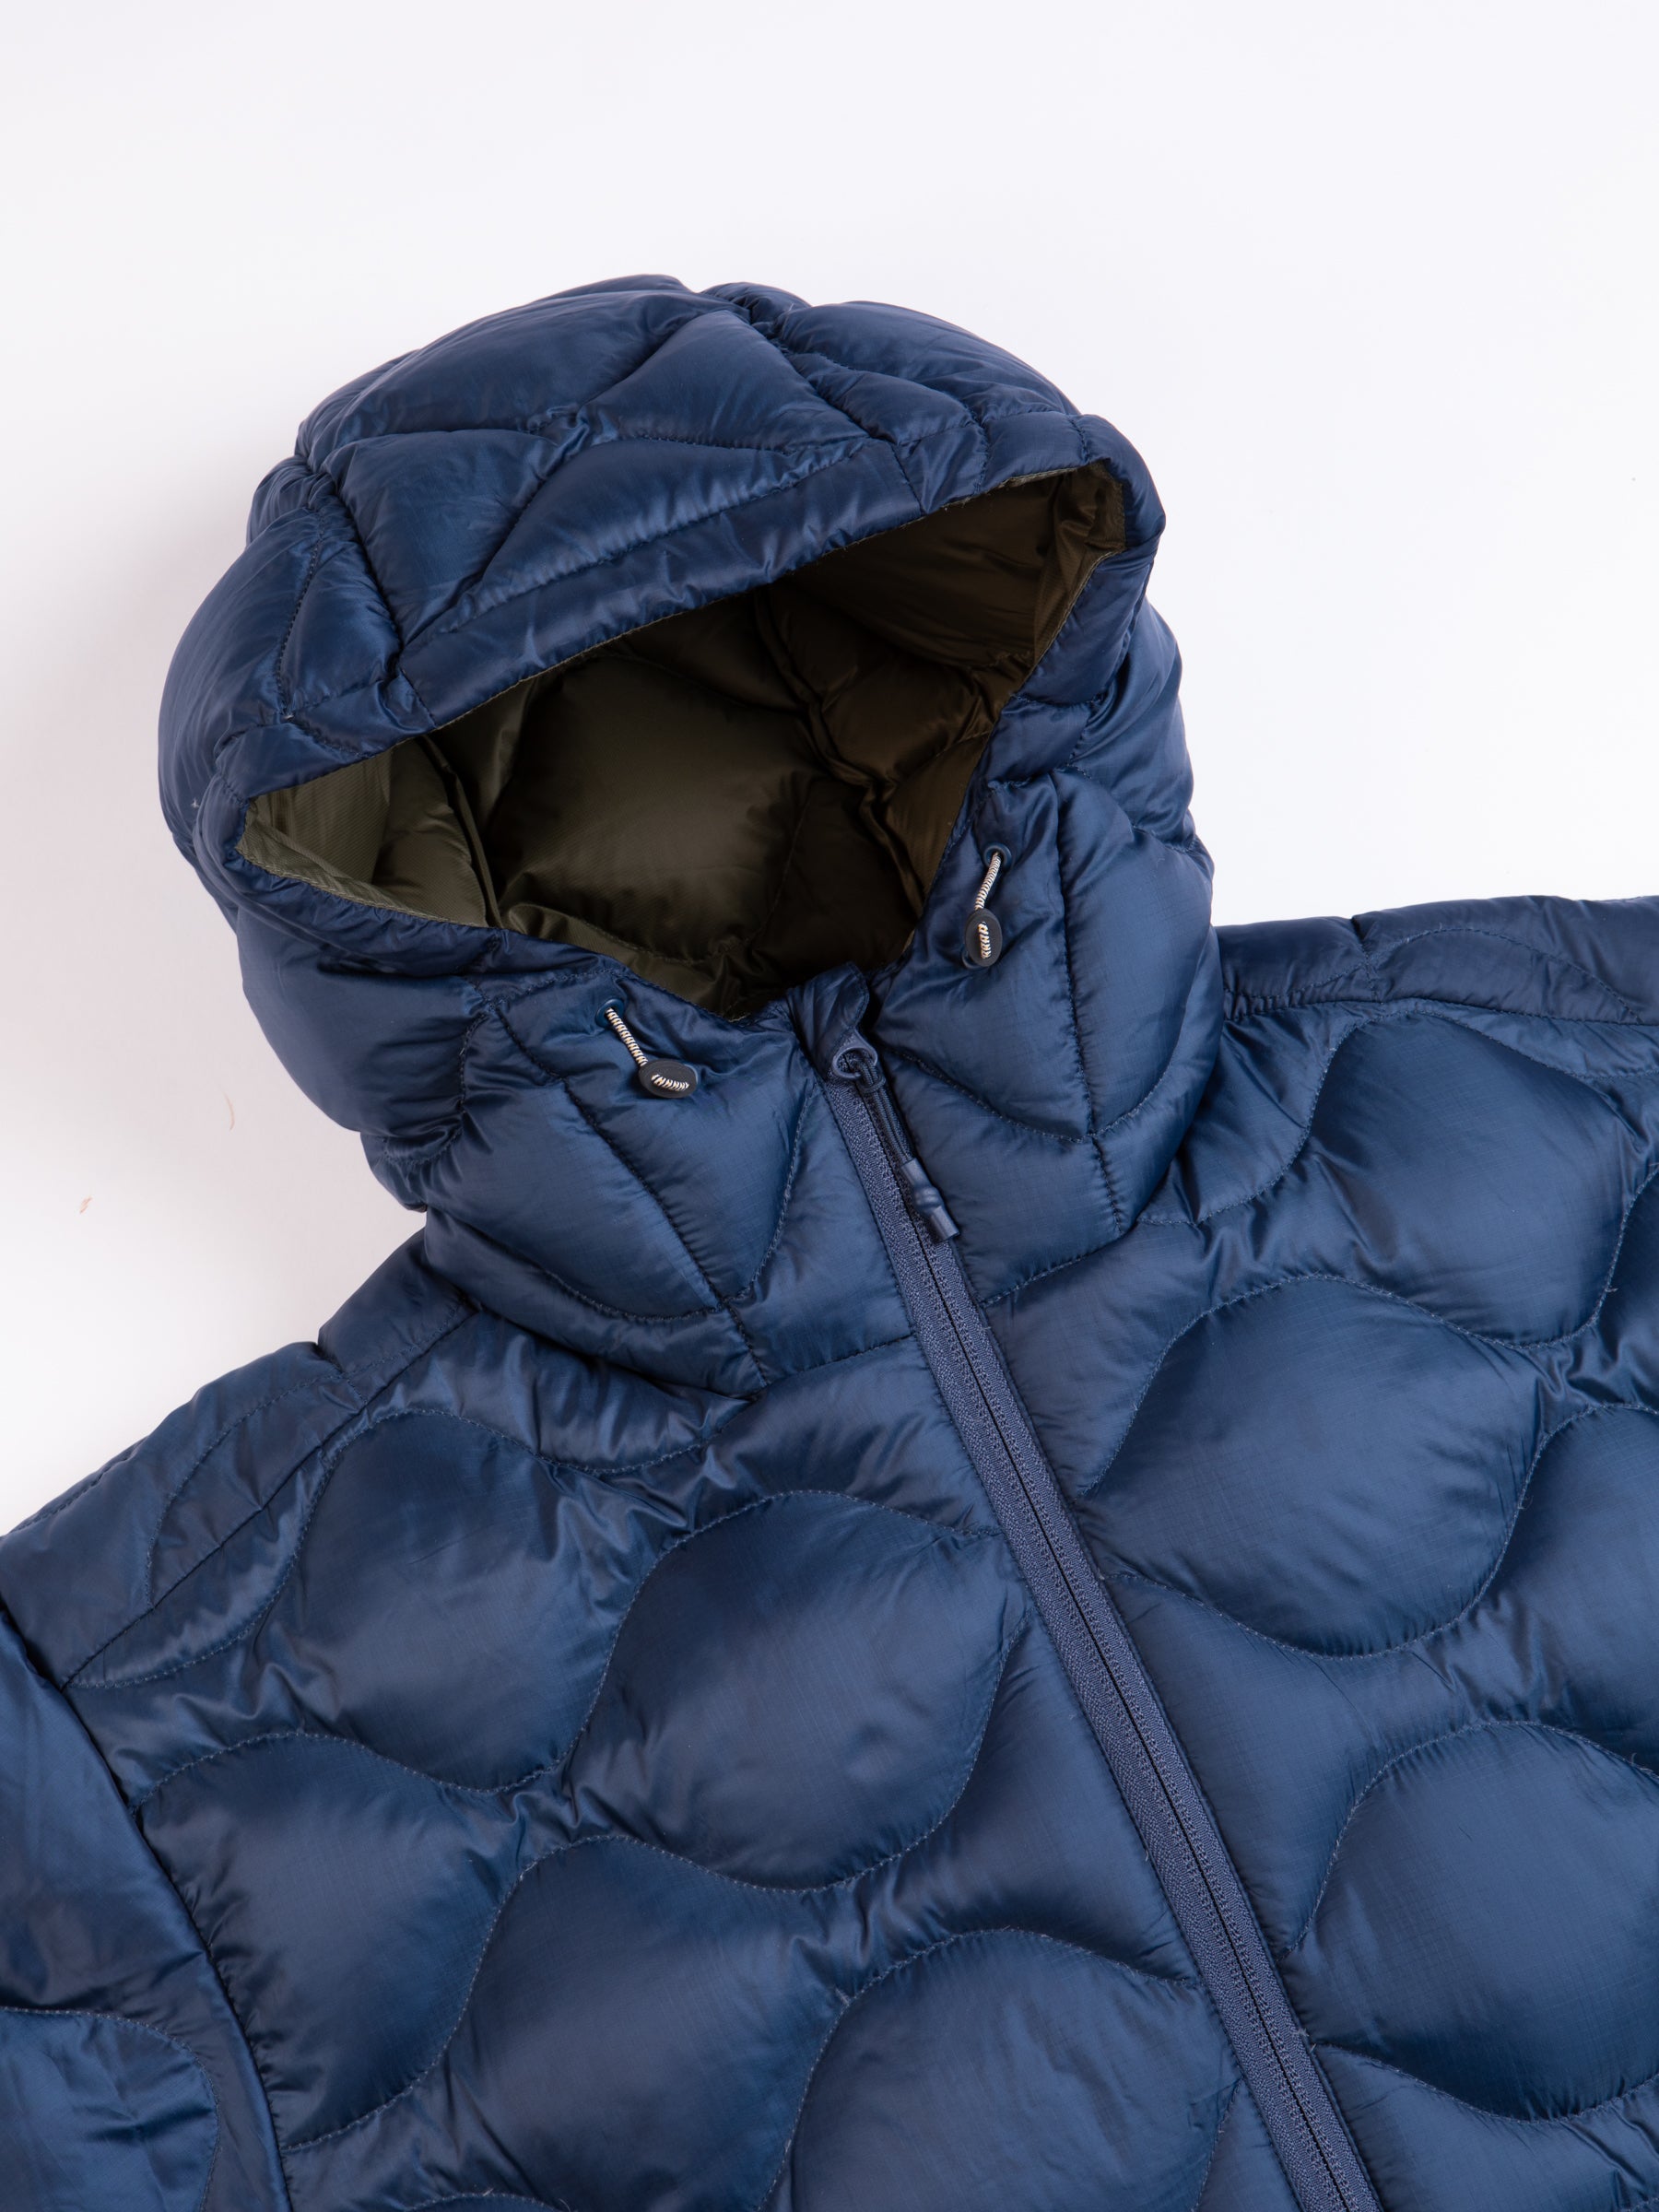 The hood of a quilted down jacket in blue on a white background.